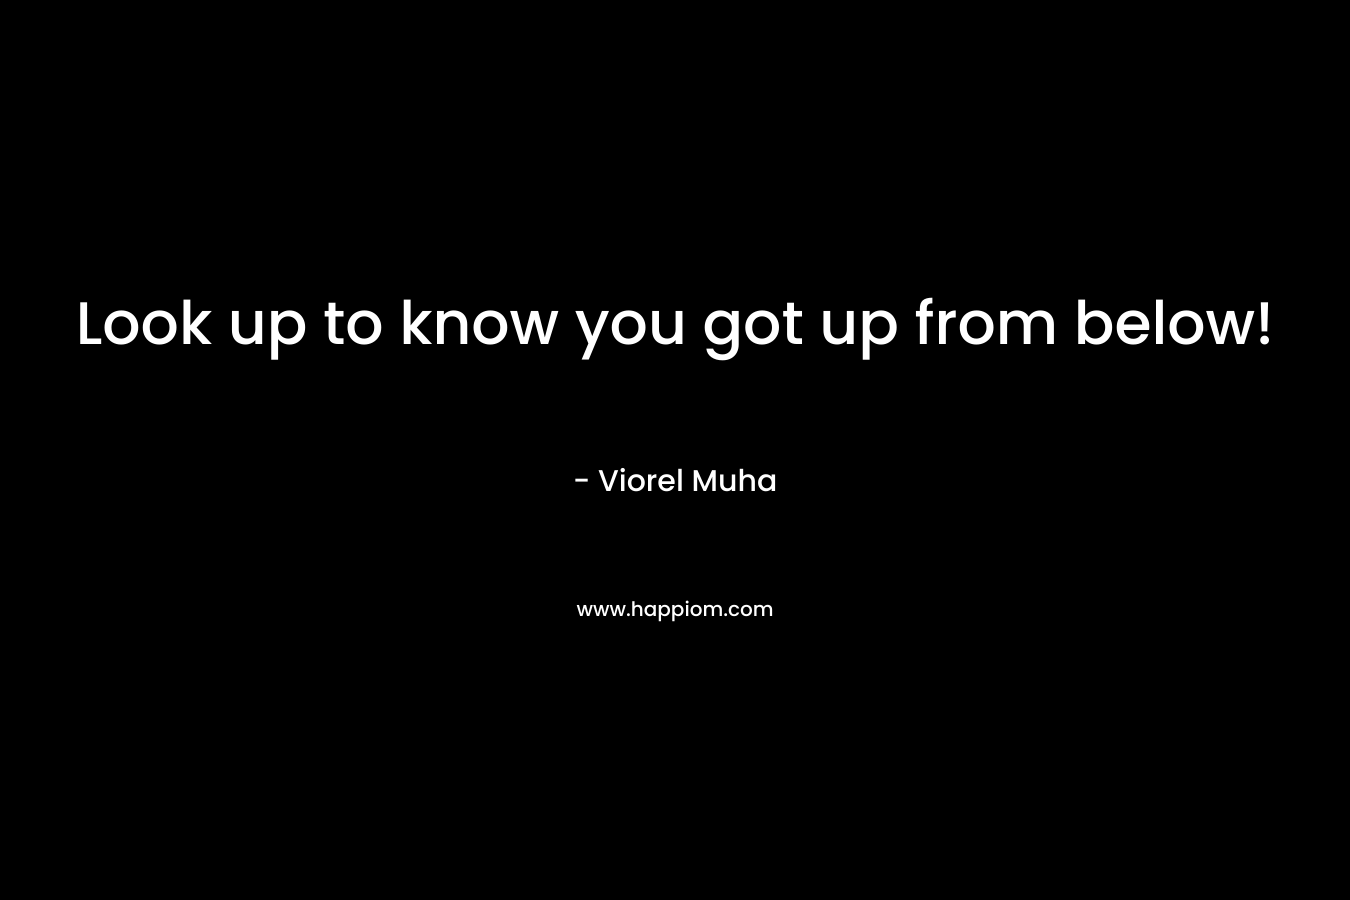 Look up to know you got up from below! – Viorel Muha